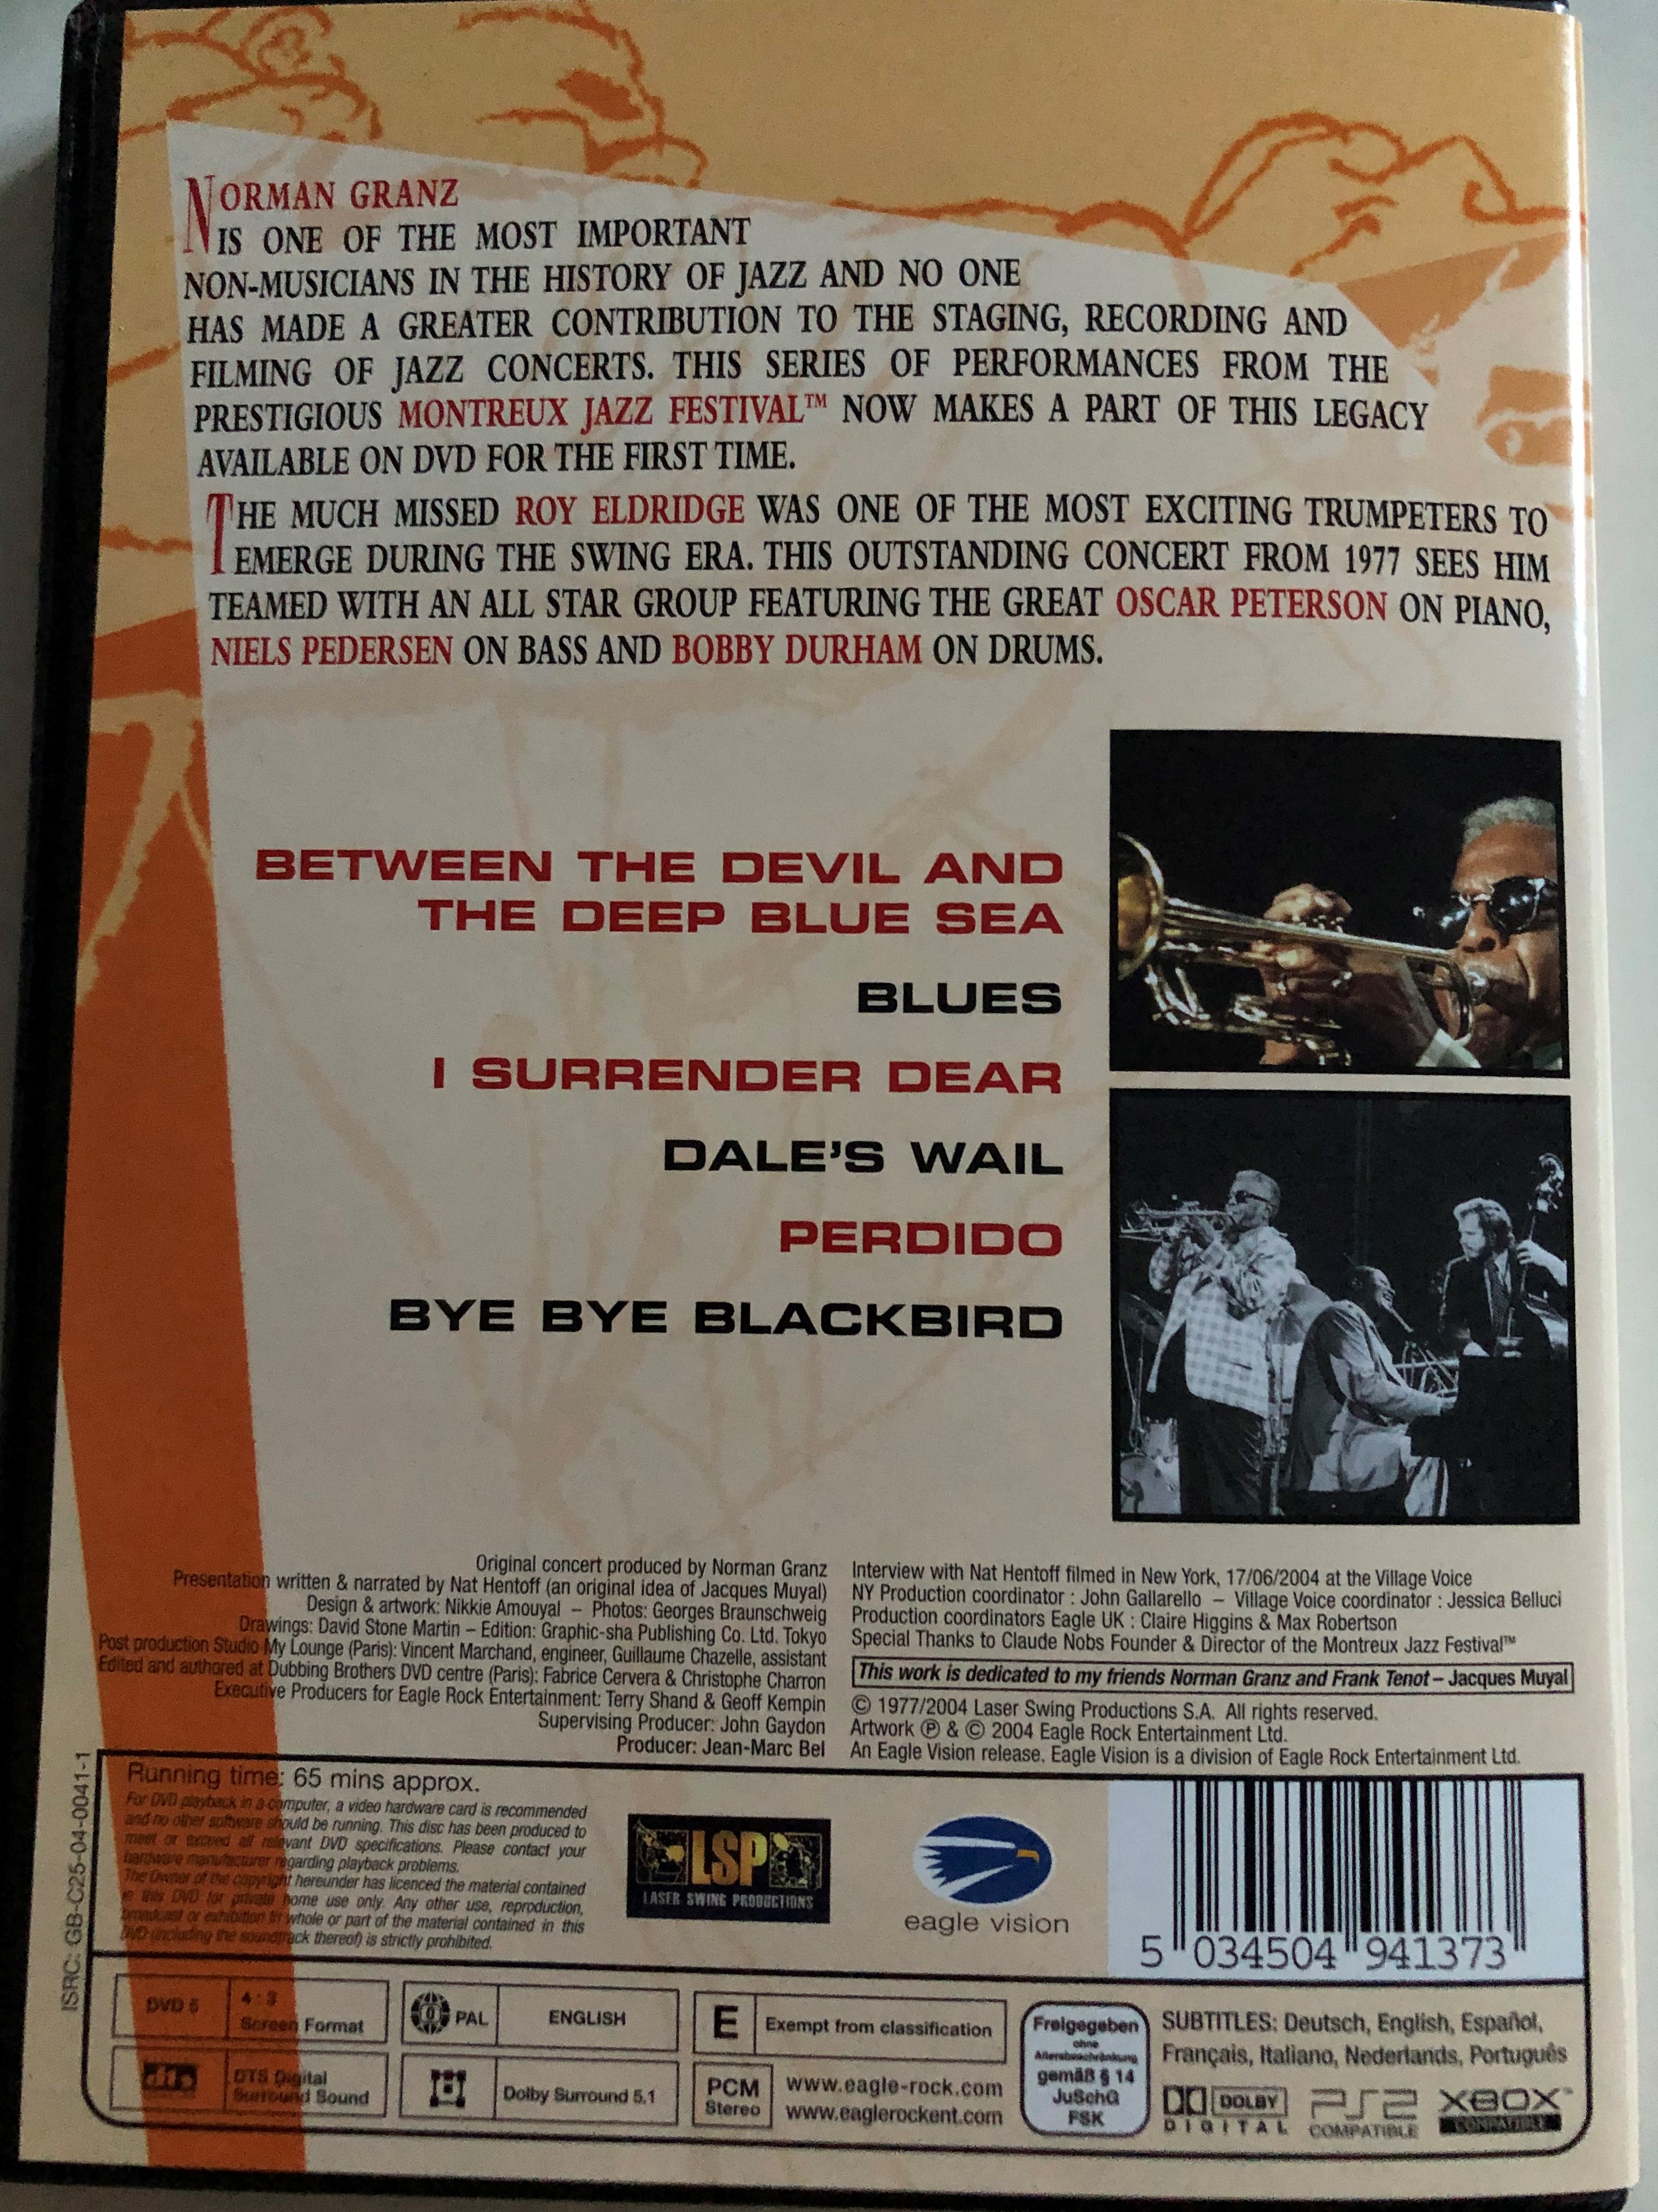 roy-eldridge-77-dvd-2004-norman-granz-jazz-in-montreux-between-the-devil-and-the-deep-blue-sea-blues-i-surrender-dear-perdido-restored-and-remastered-in-dolby-digital-5.1-dts-surround-2-.jpg